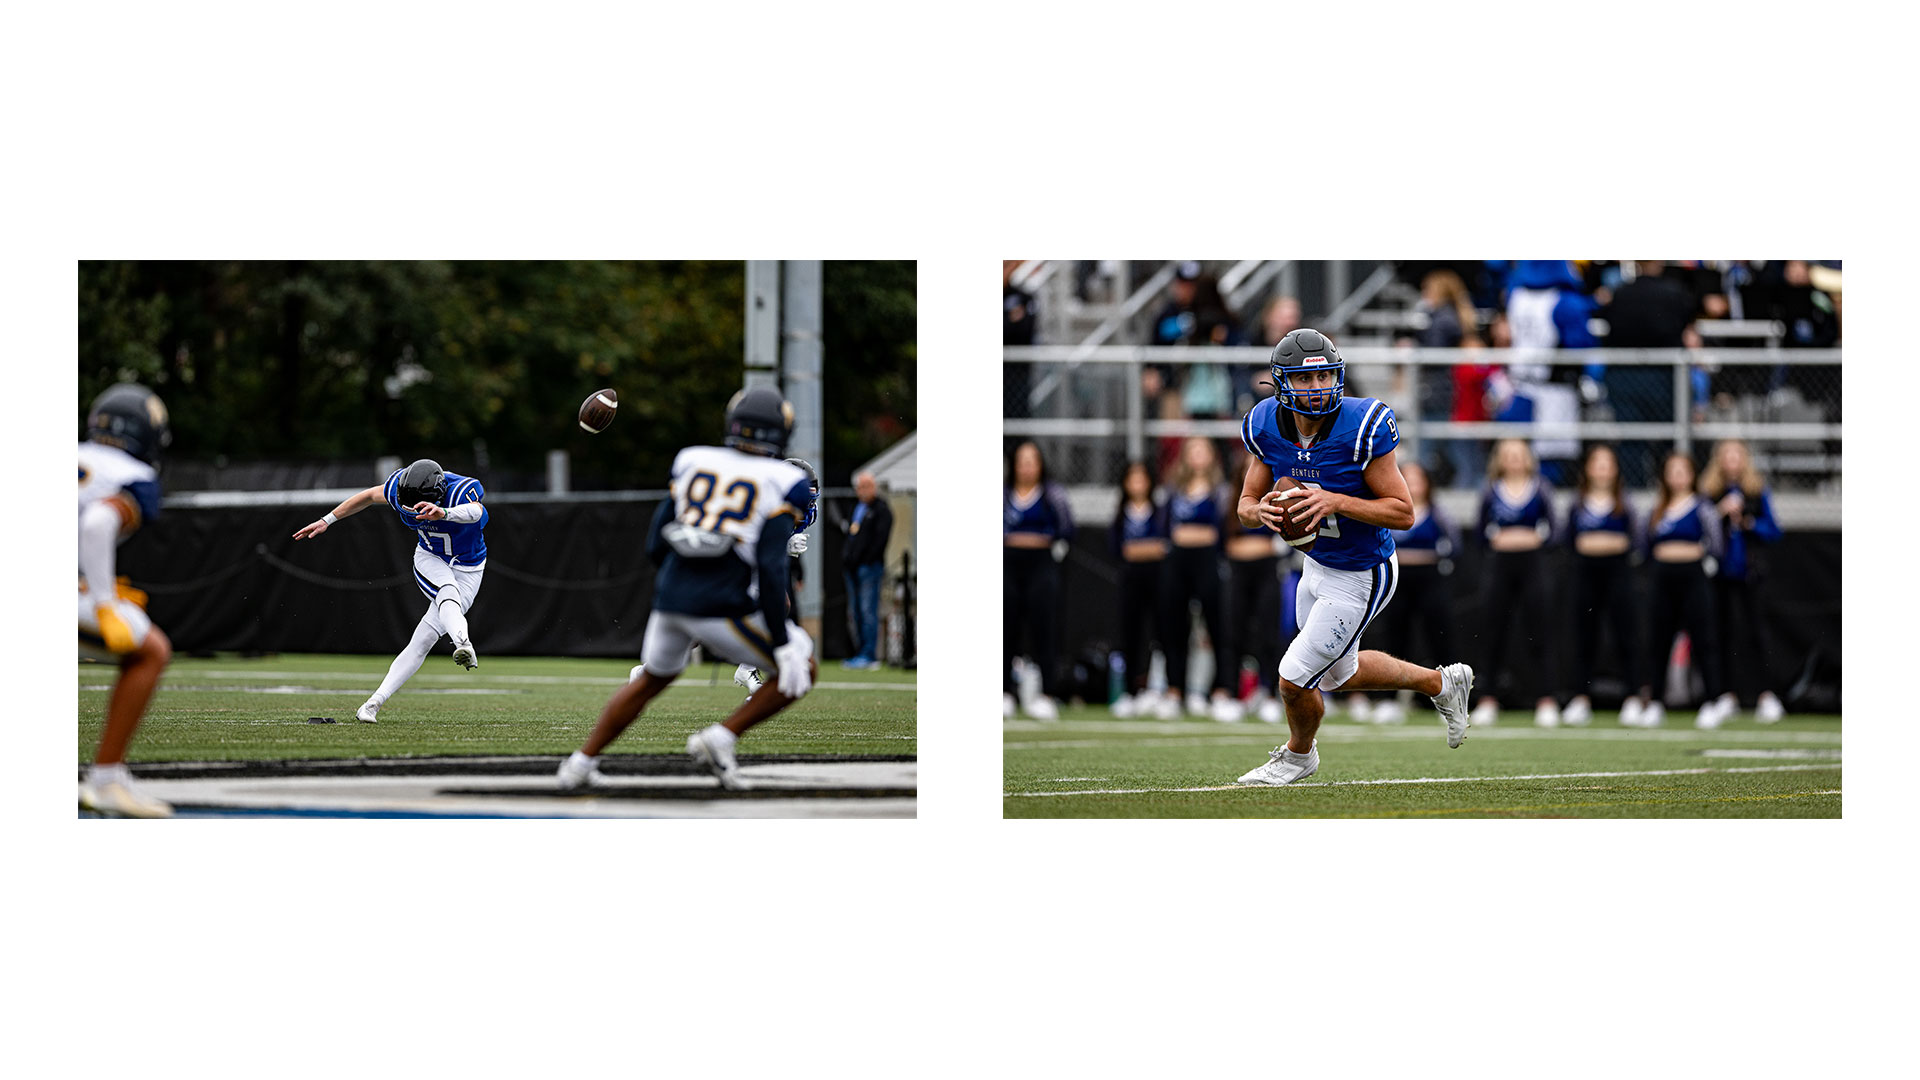 Campbell, Waid claim NE10 honors following win over AIC